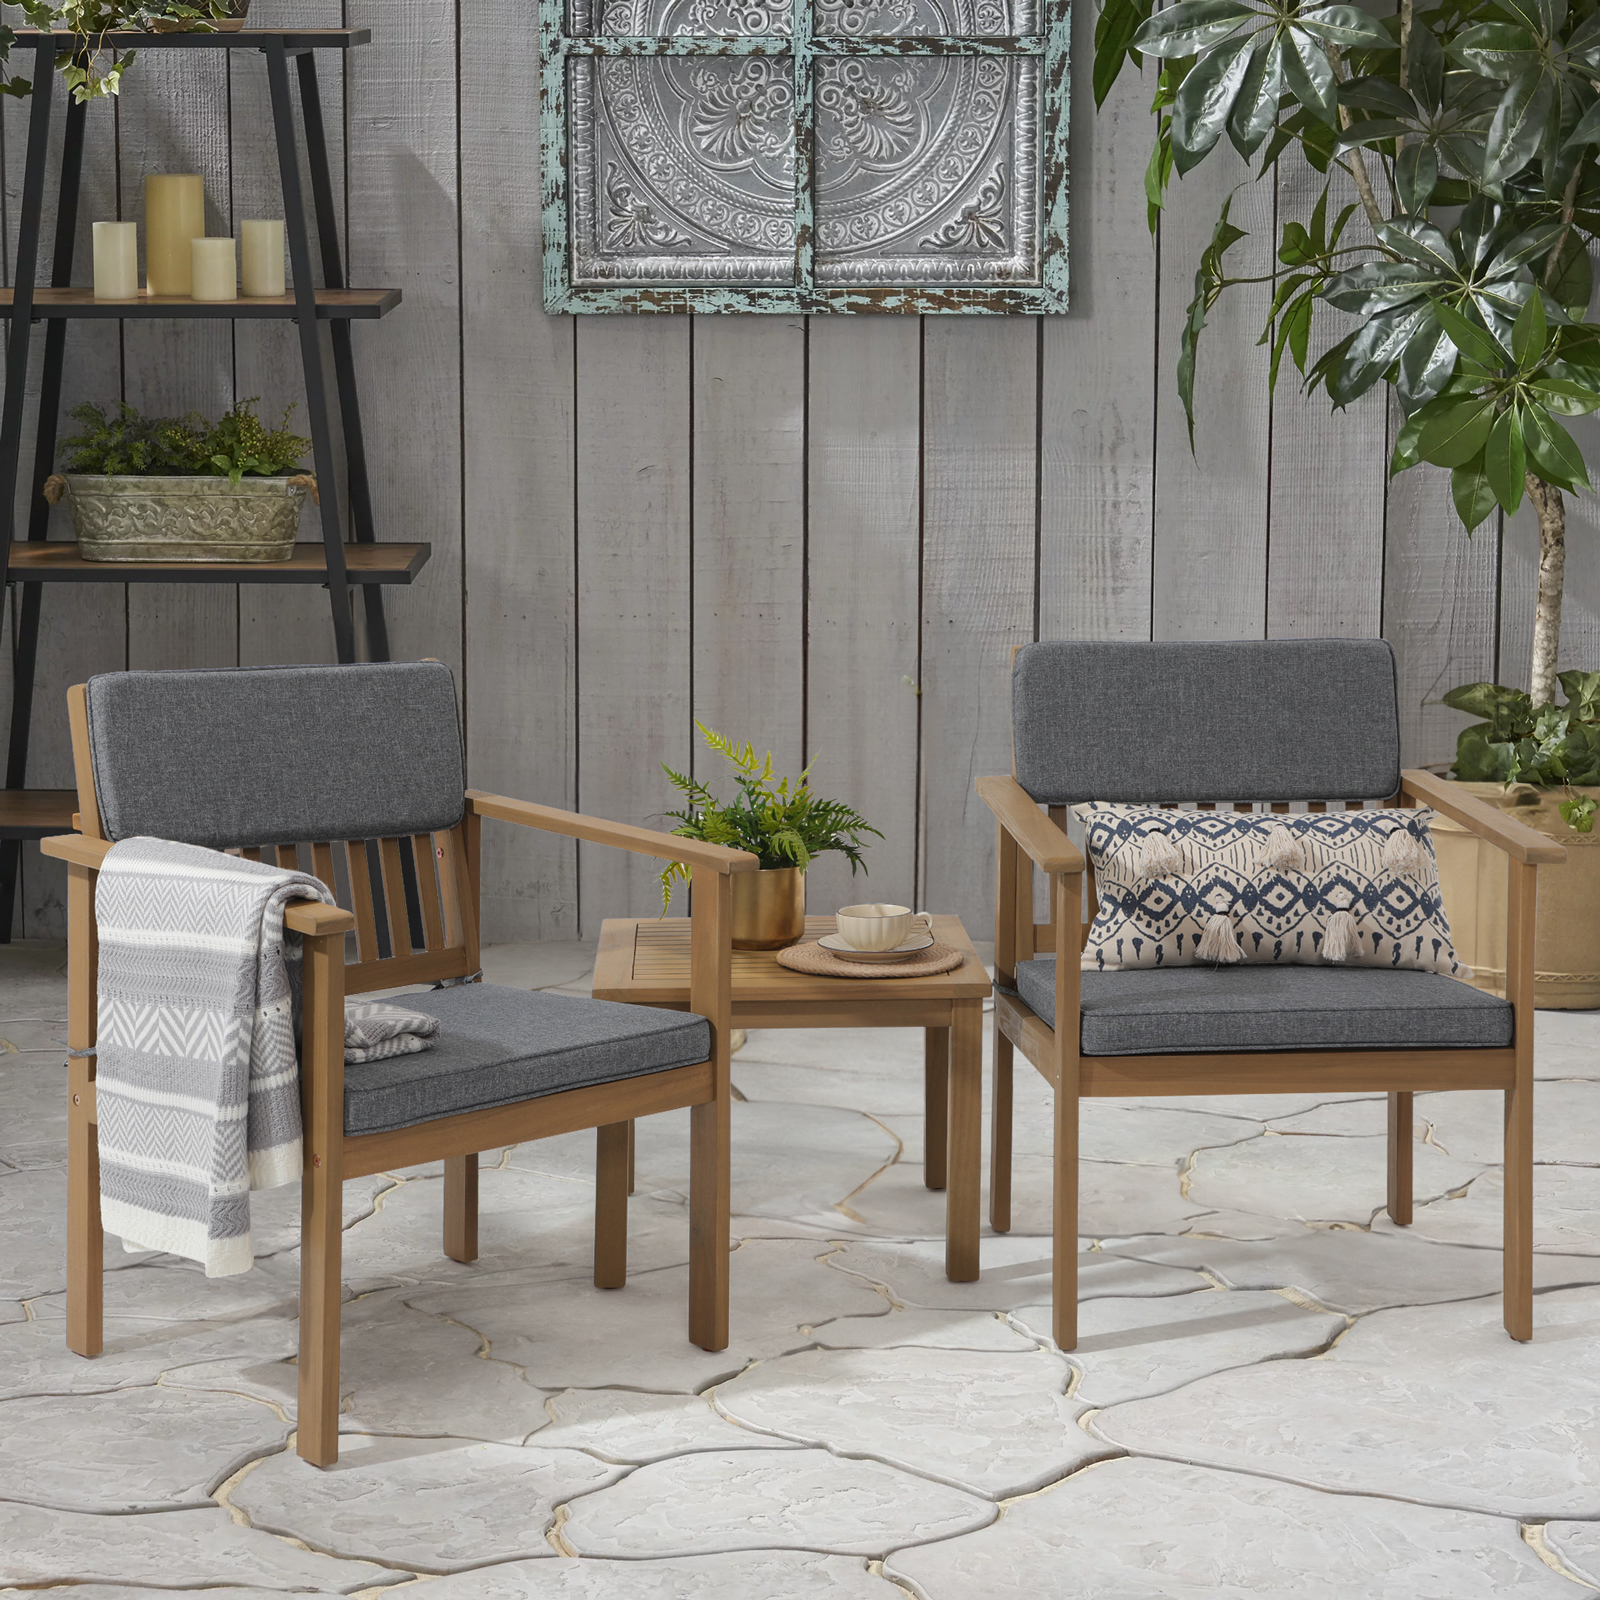 3 Piece Acacia Wood Outdoor Patio Furniture Set, FSC Certified Bistro Table and Chairs